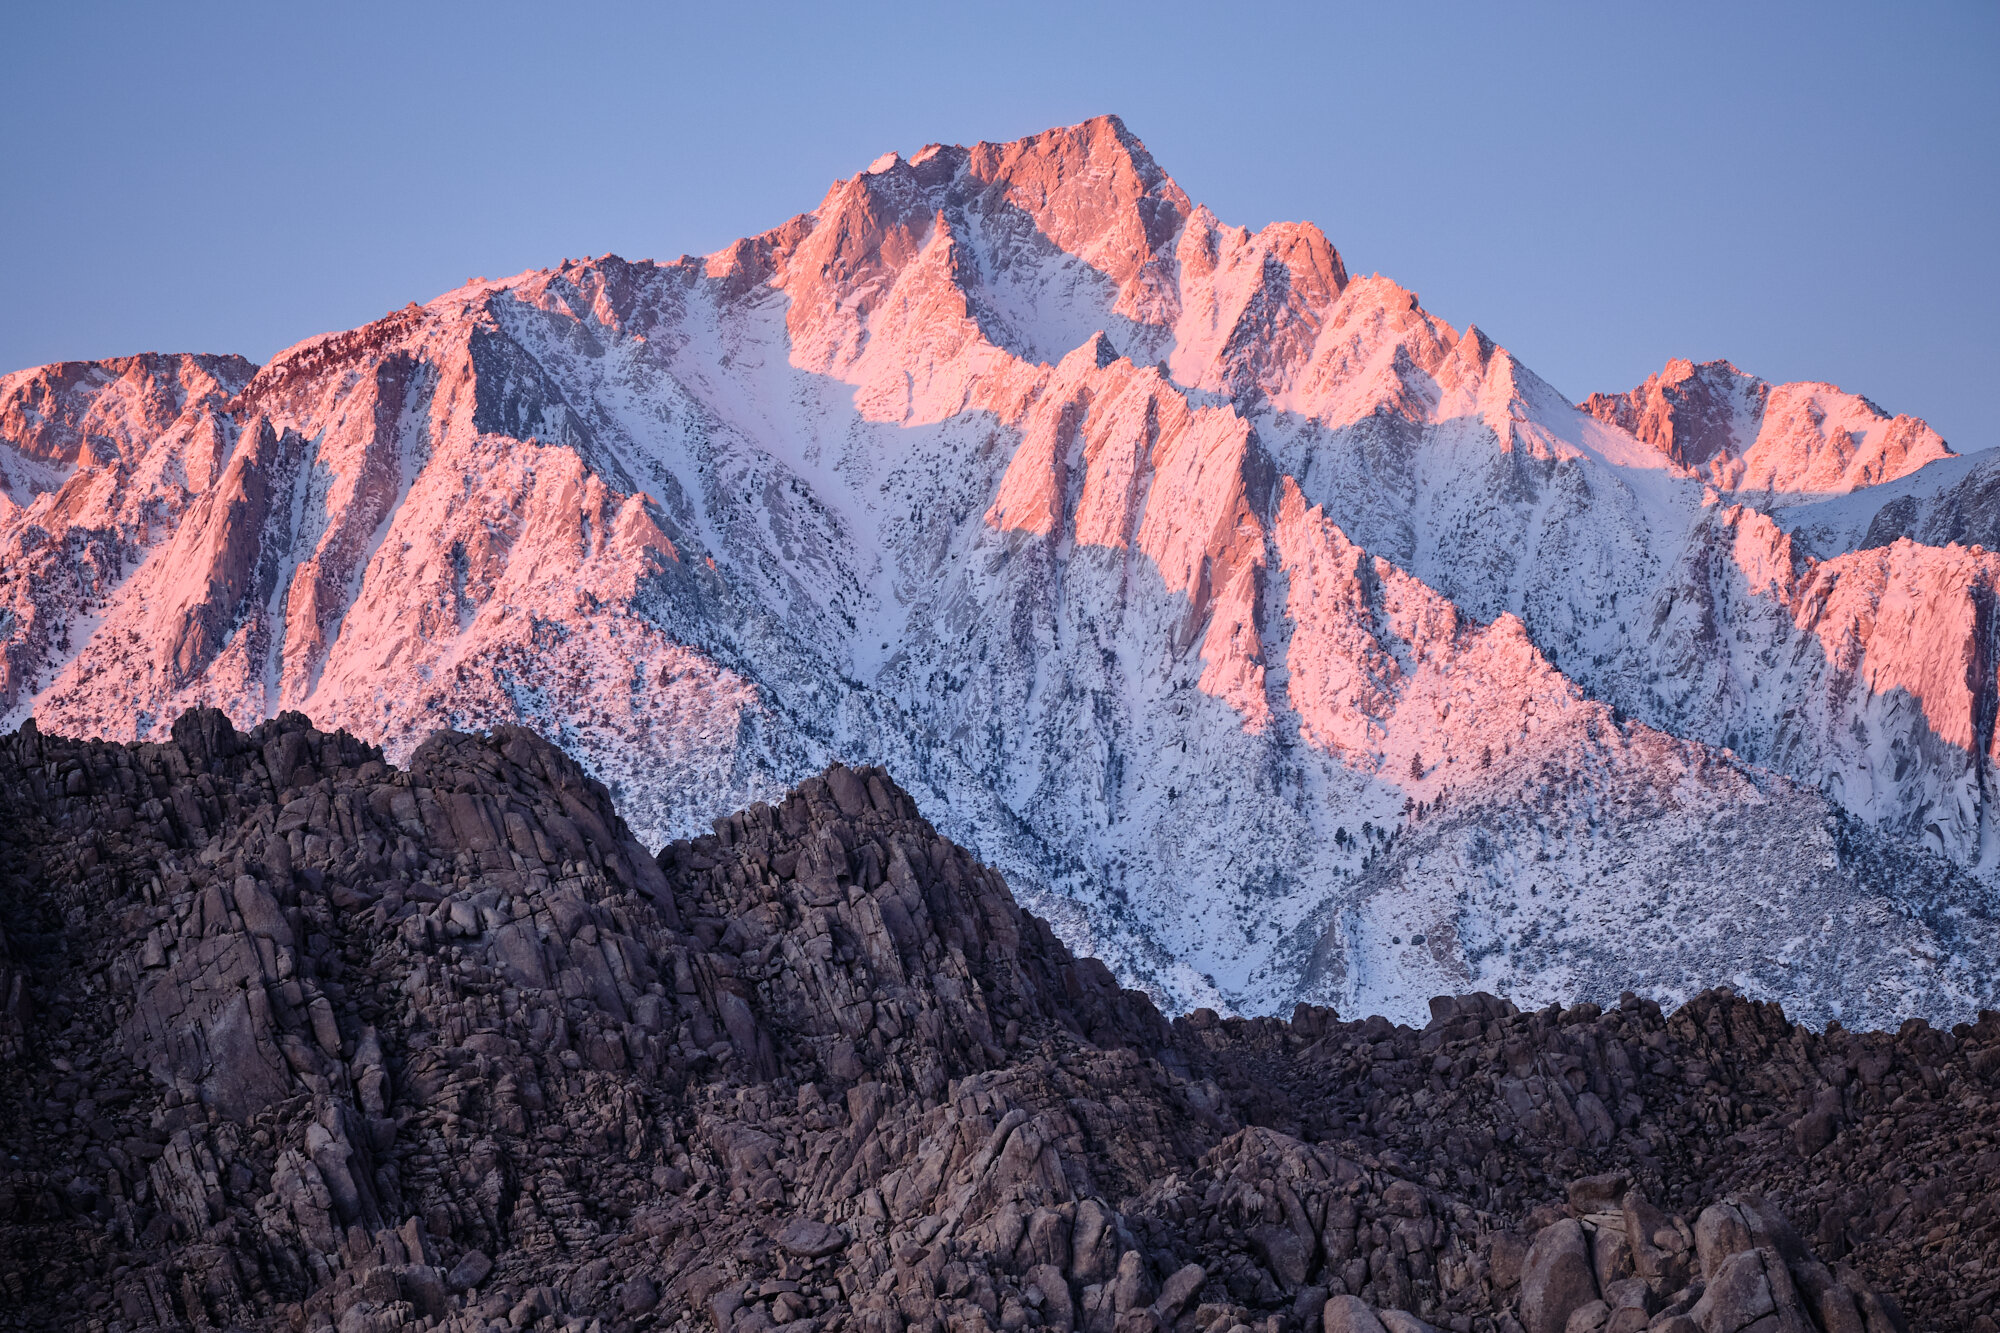 Alabama Hills and Snow Capped Sierra Nevada